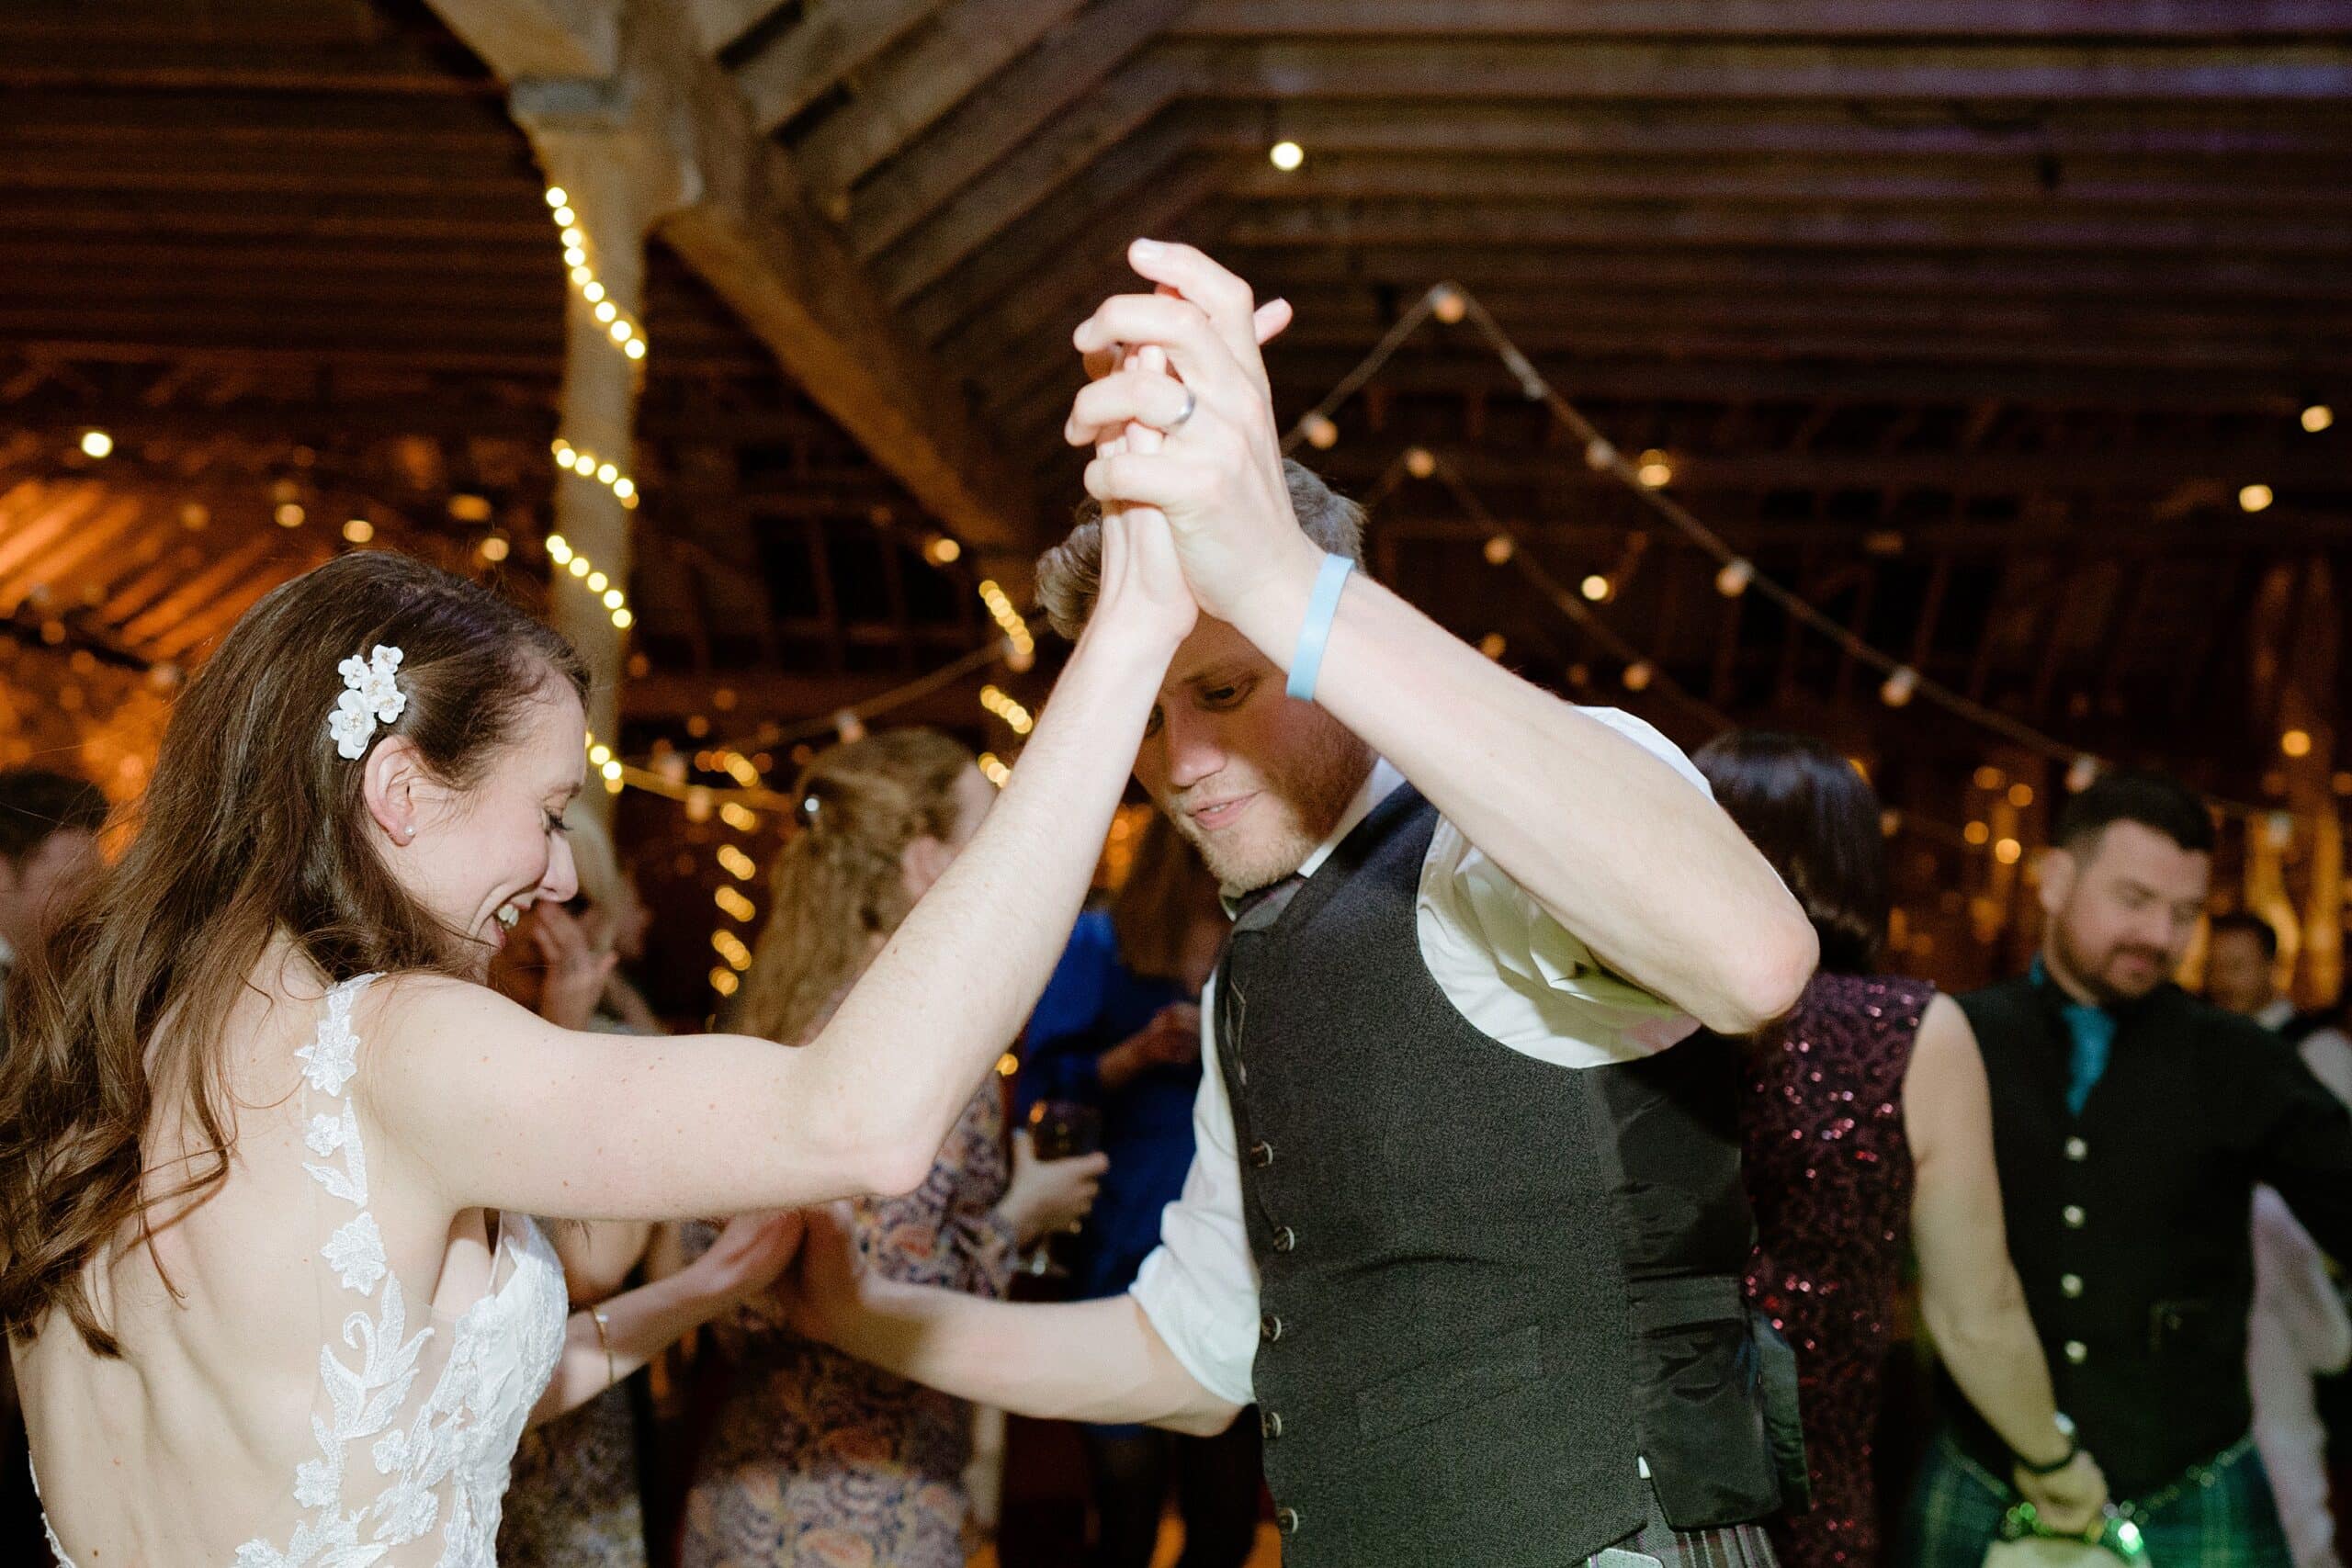 st andrews wedding photographer captures the bride dancing with a guest underneath wooden beams with festoon lights in the background at a farm wedding venue in scotland